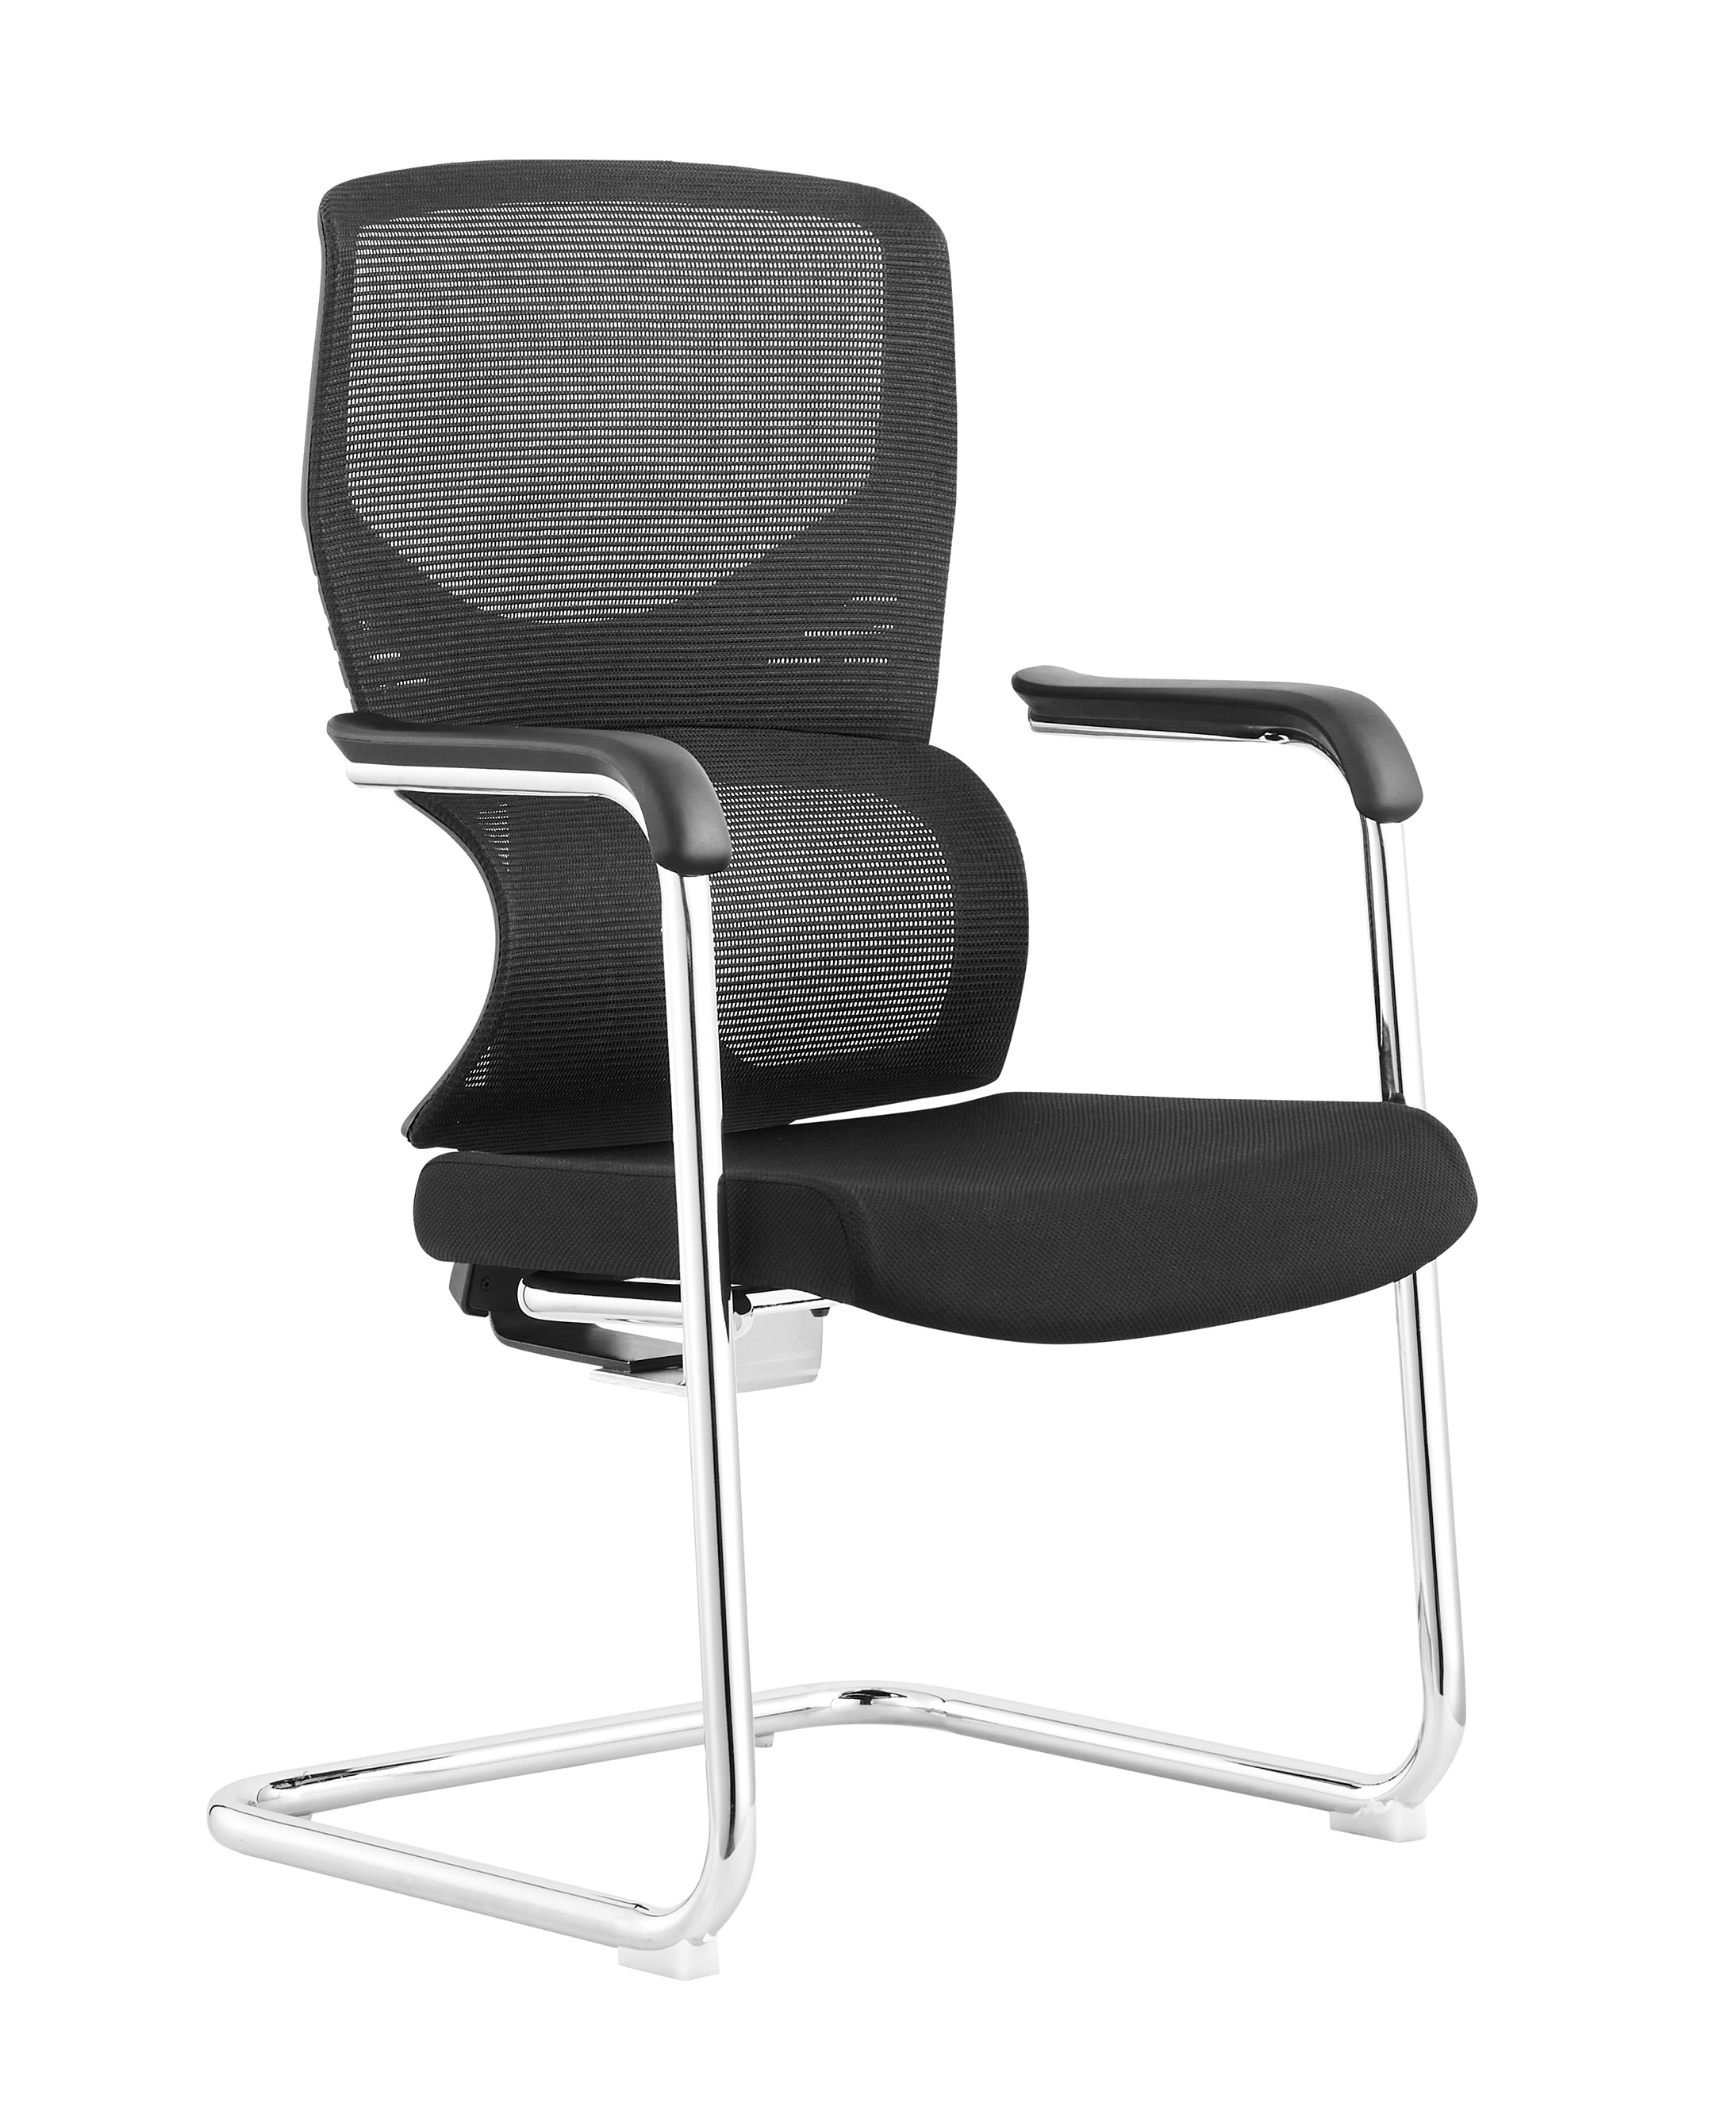 mesh office chairs on sale, high end mesh office chairs